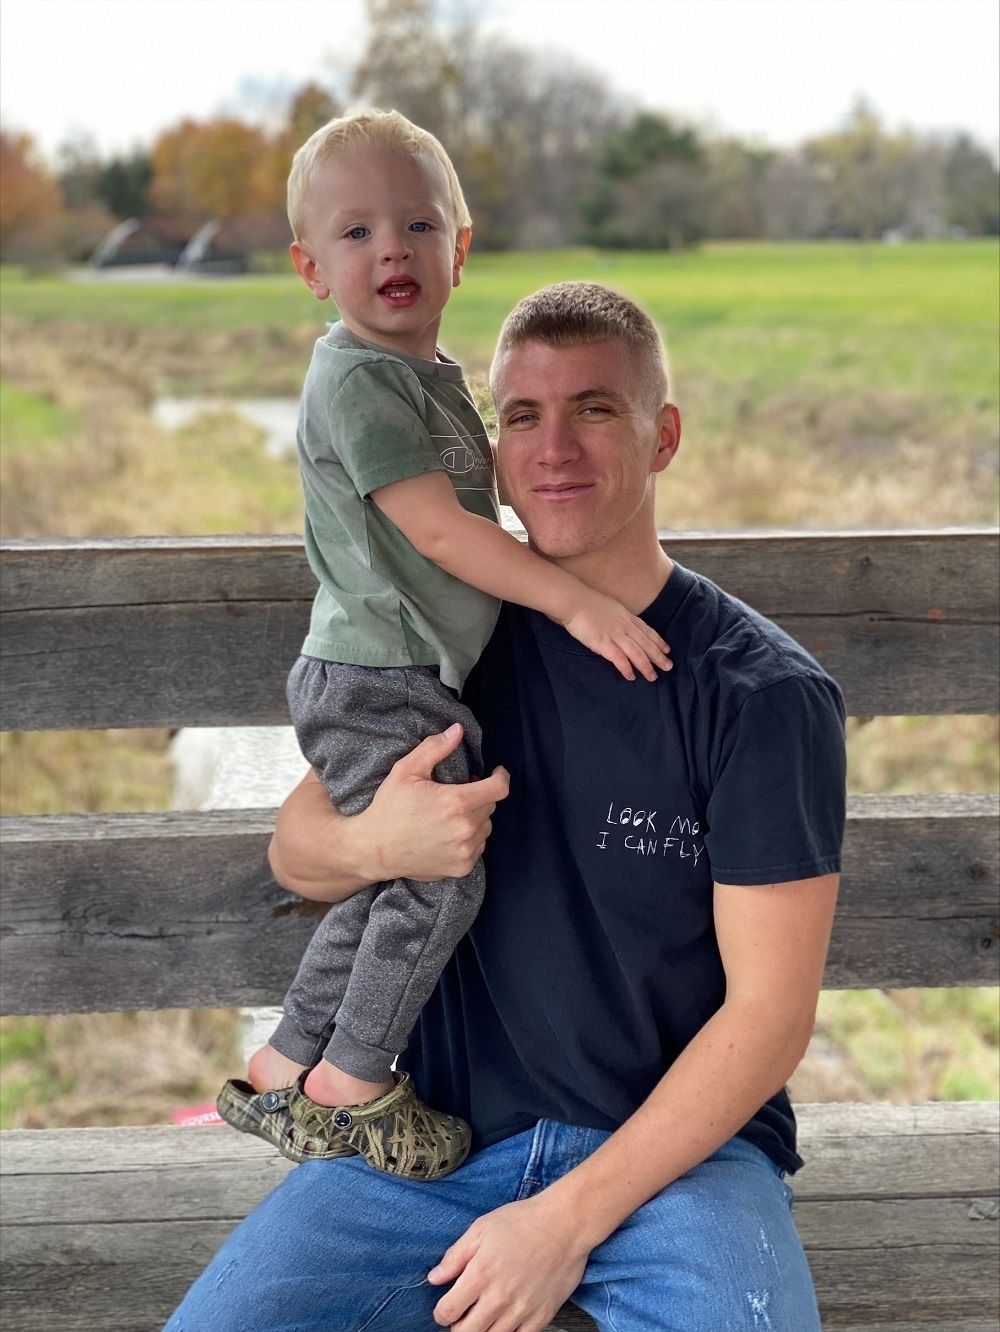 Maxwell holds his young son while sitting on a wooden bridge on a nice day.